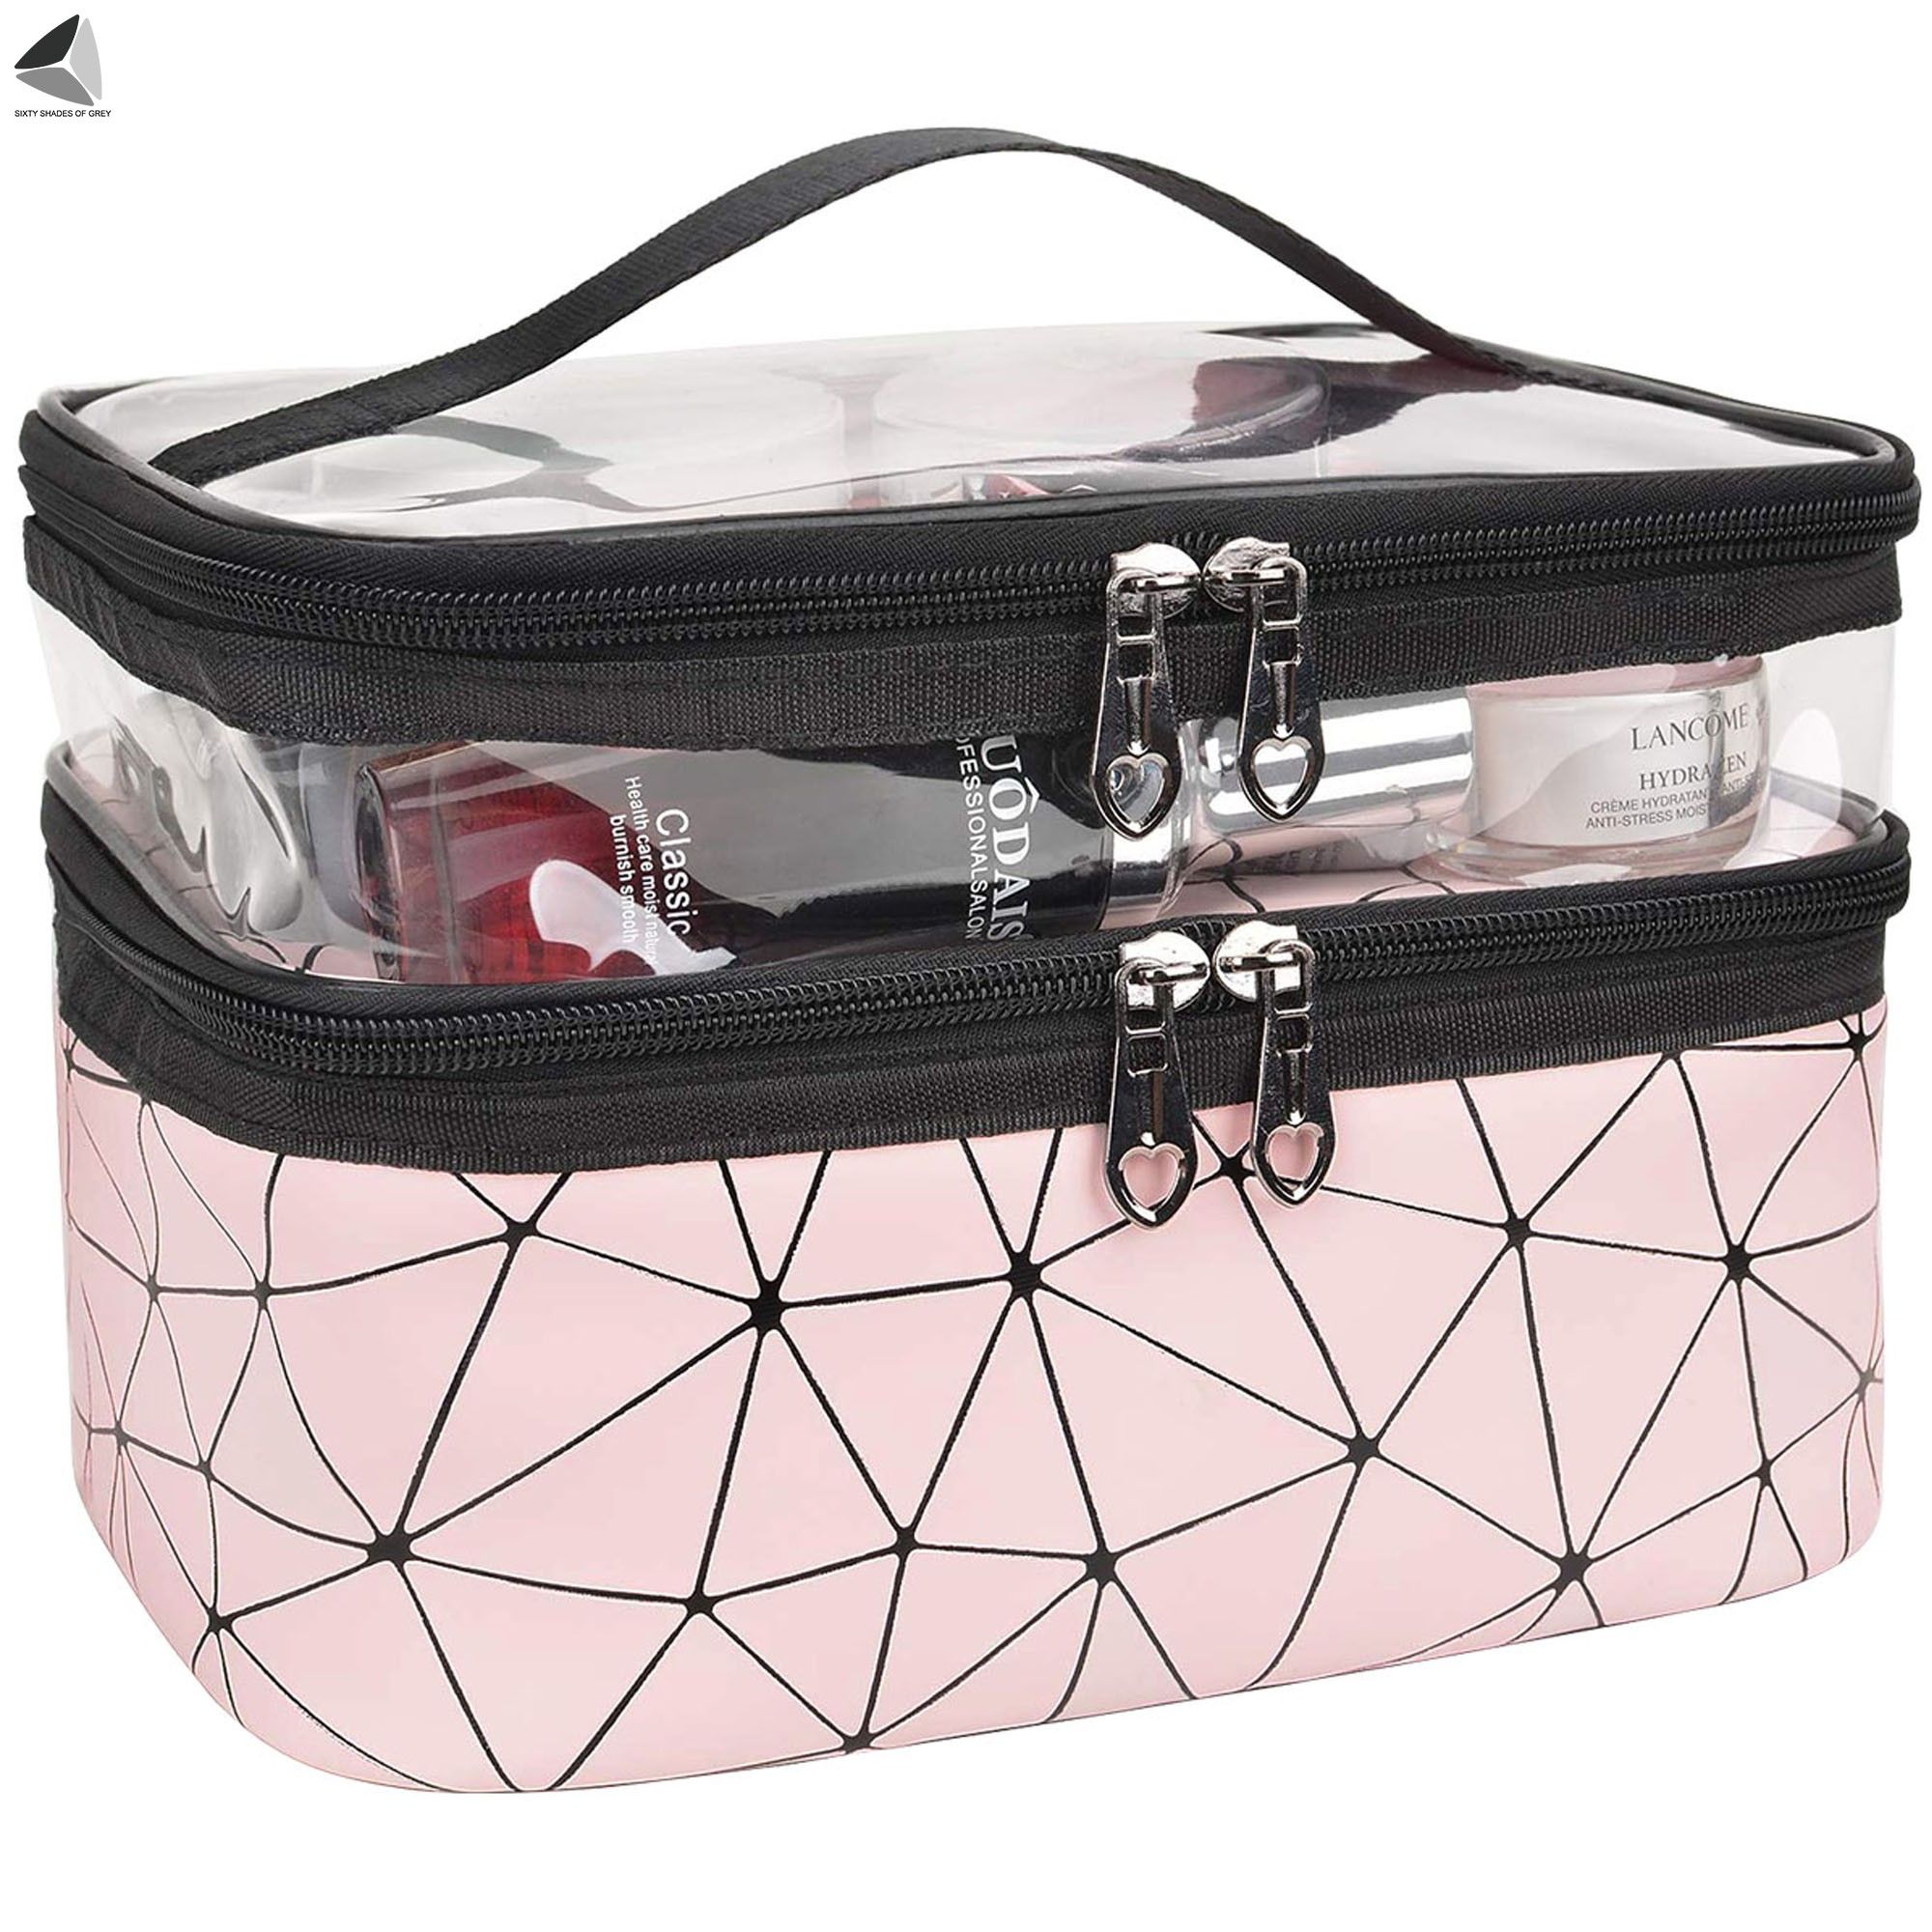 PULLIMORE Portable Travel Makeup Bags Double Layer Cosmetic Cases Make Up Organizer Toiletry Bag for Women and Girls (Pink) - image 2 of 8